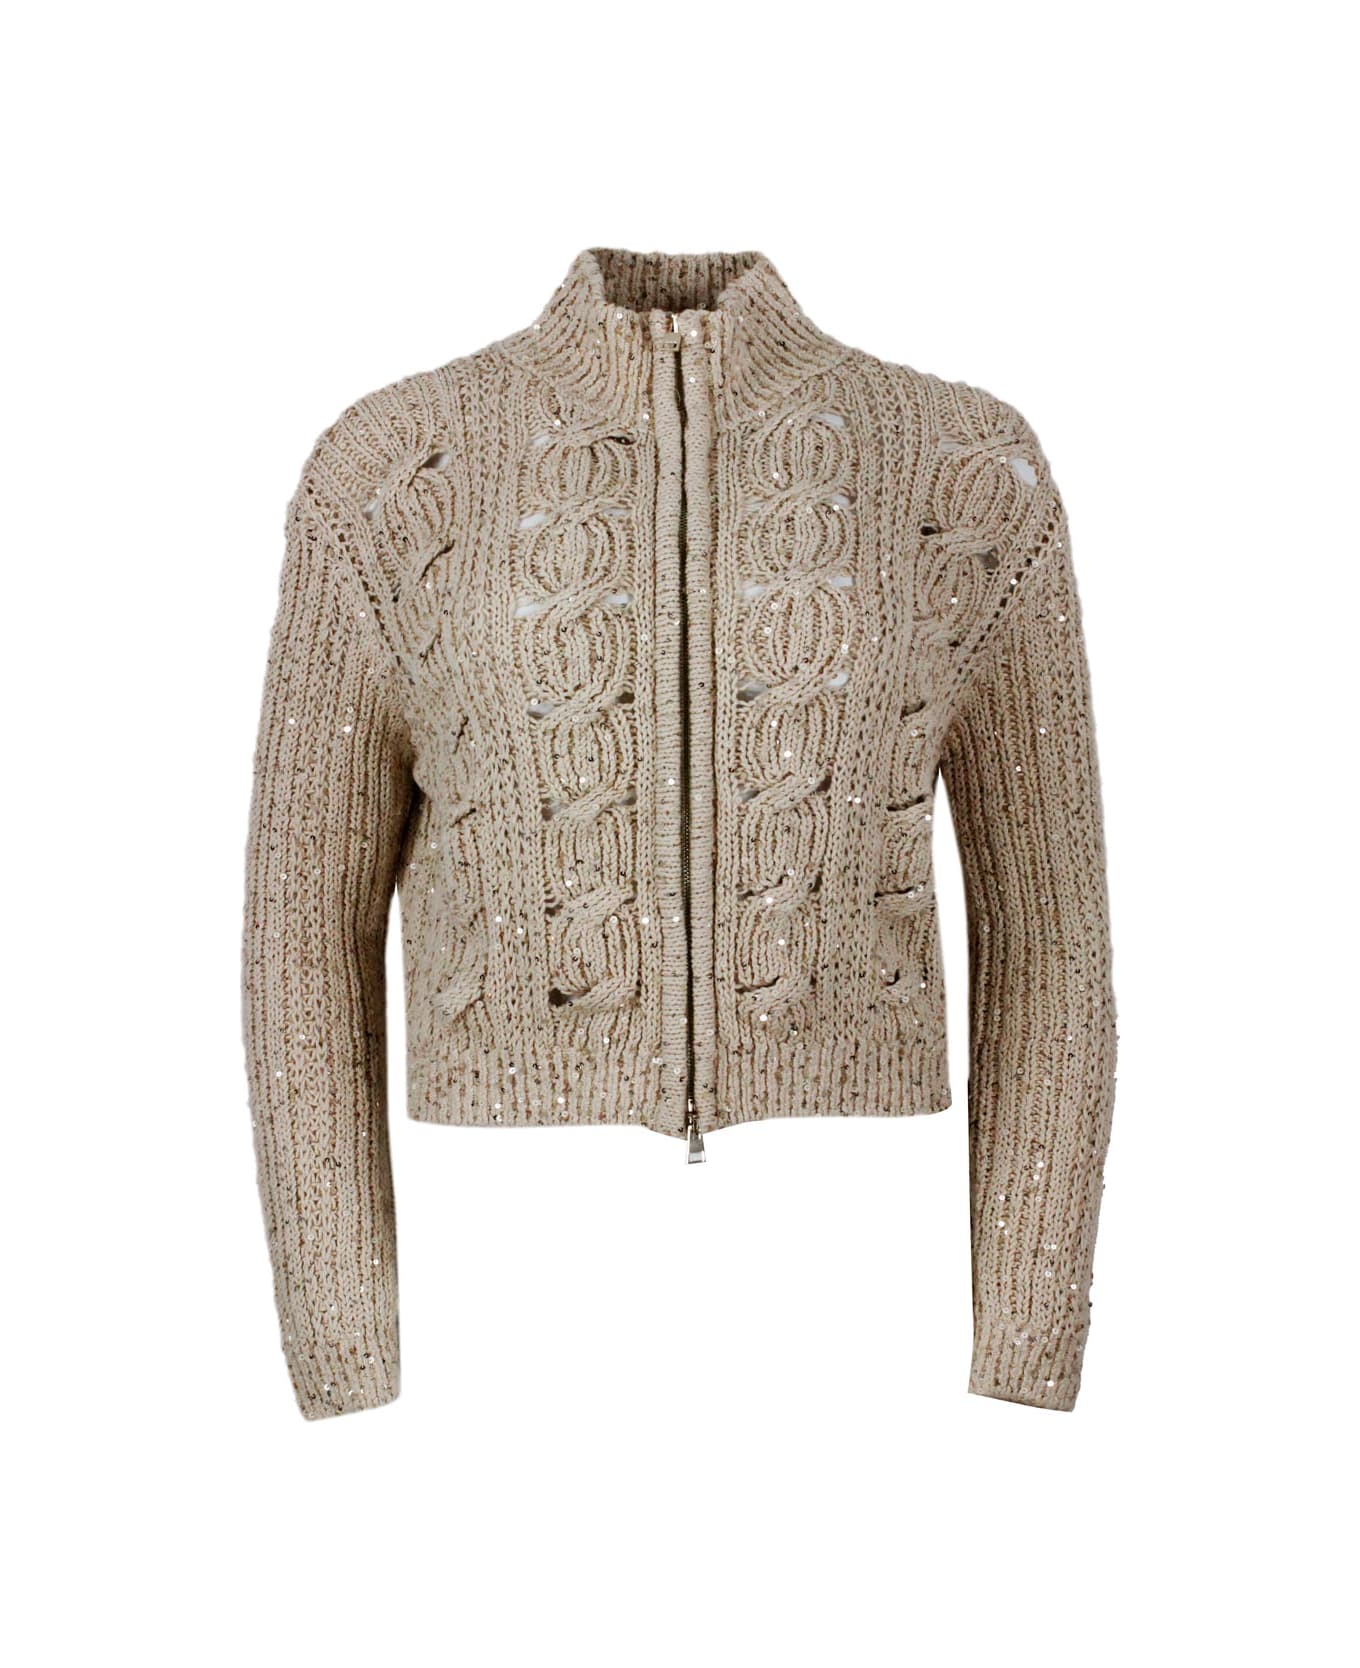 Lorena Antoniazzi Long-sleeved Full-zip Cardigan Sweater In Cotton Thread With Braided Work Embellished With Applied Microsequins - Gold カーディガン